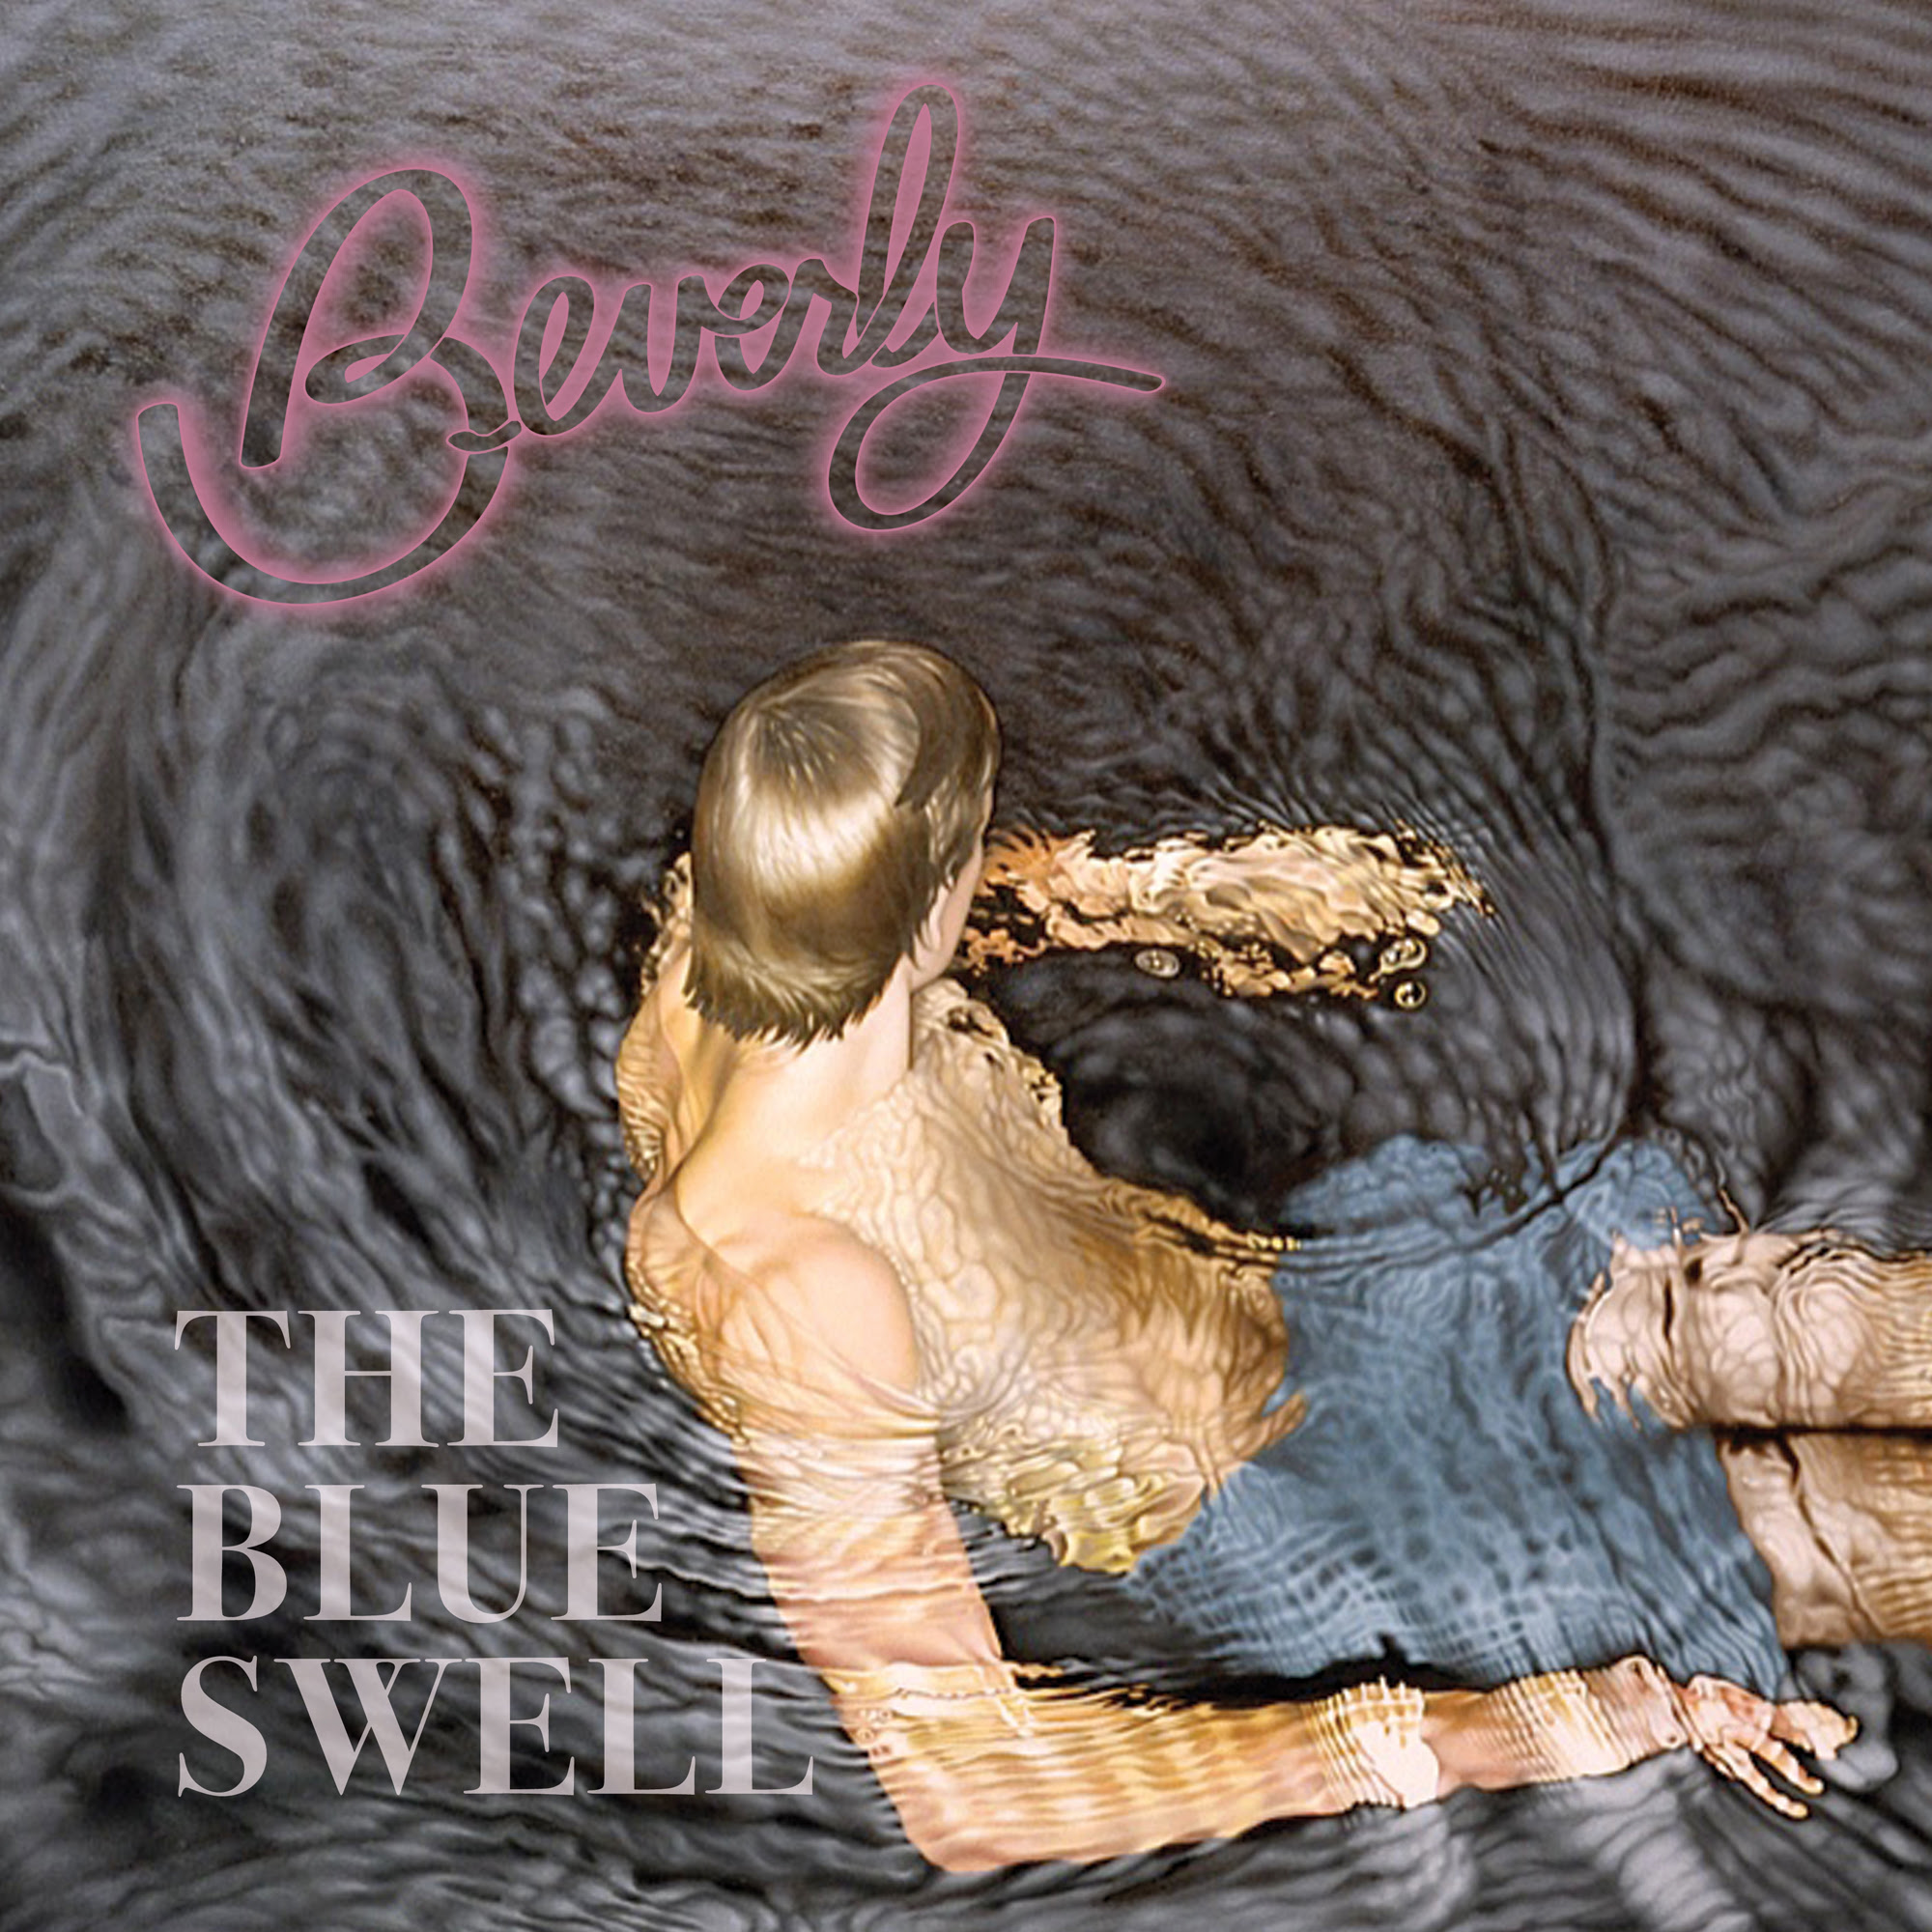 Beverly releases "Victoria" (ft. Kip Berman of The Pains of Being Pure at Heart)